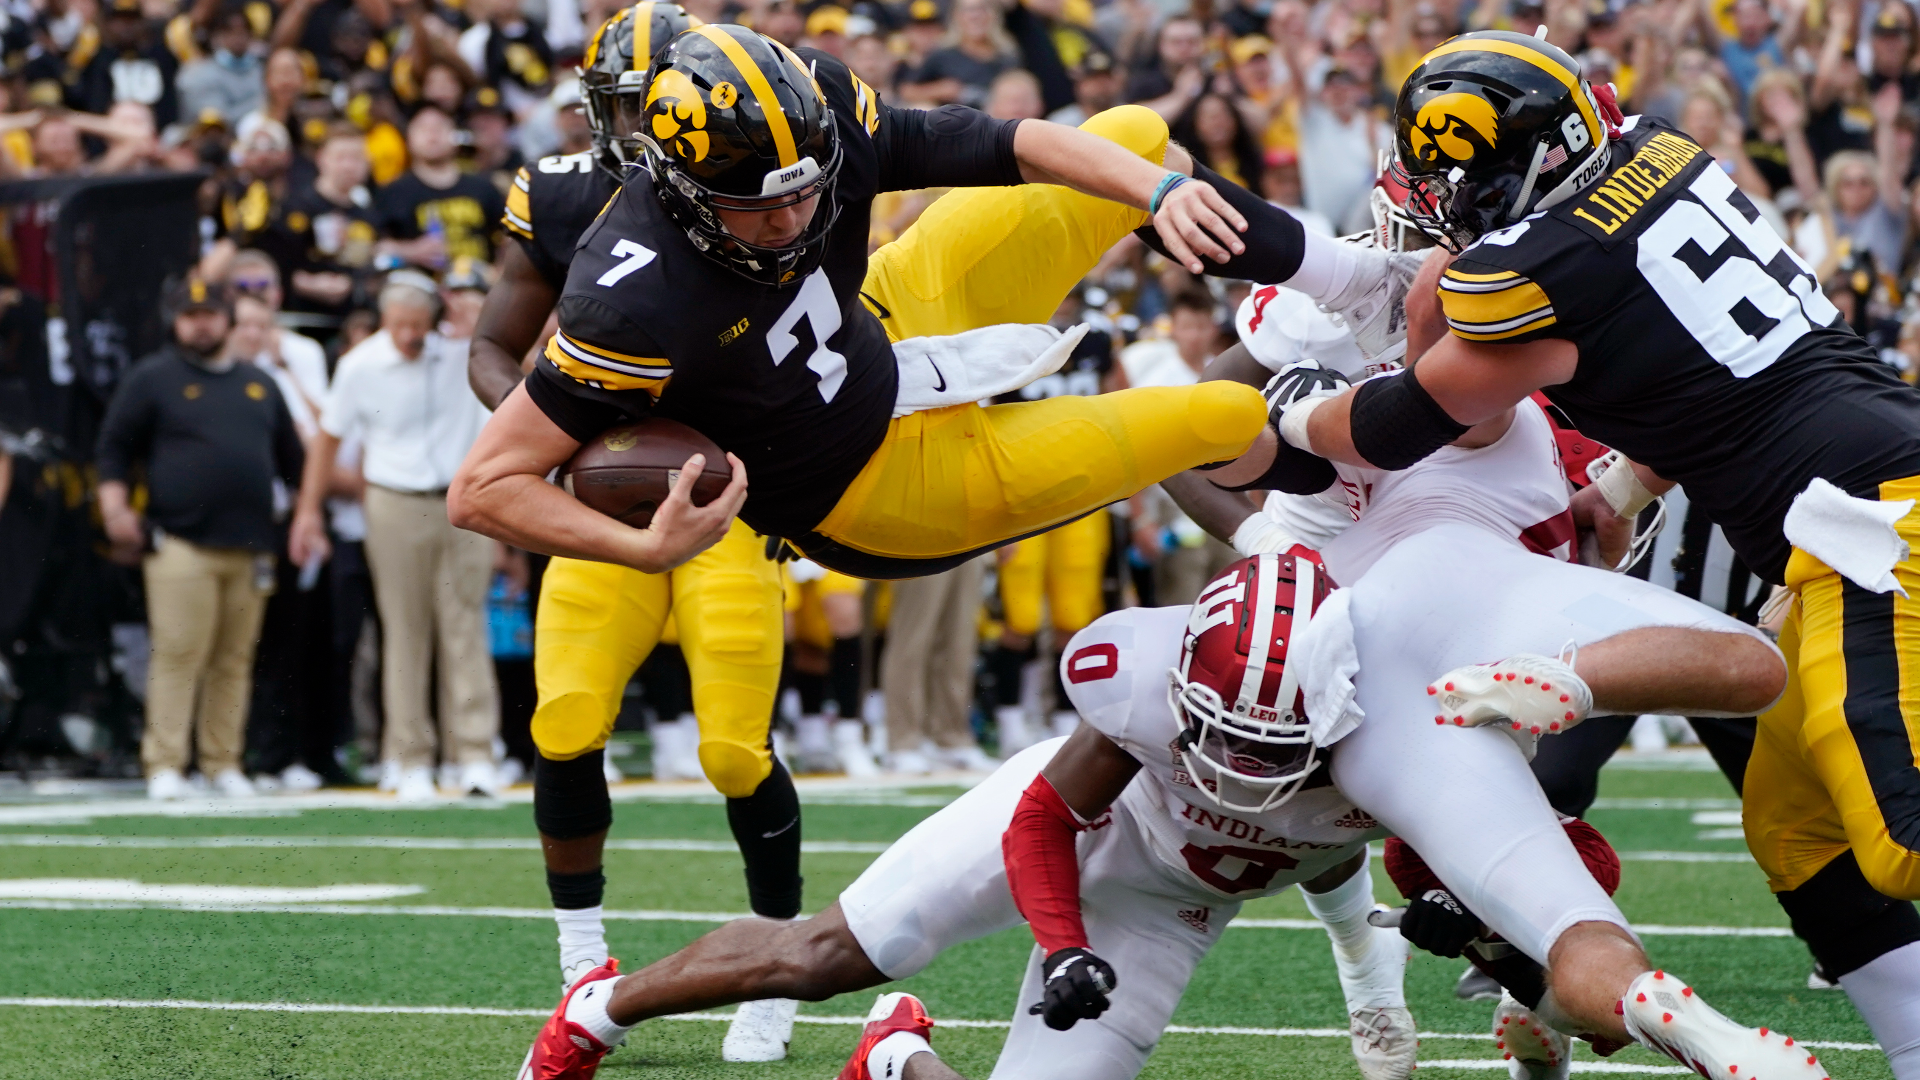 Iowa's defensive delivered two interceptions that were returned for touchdowns as Iowa routes Indian 34-6